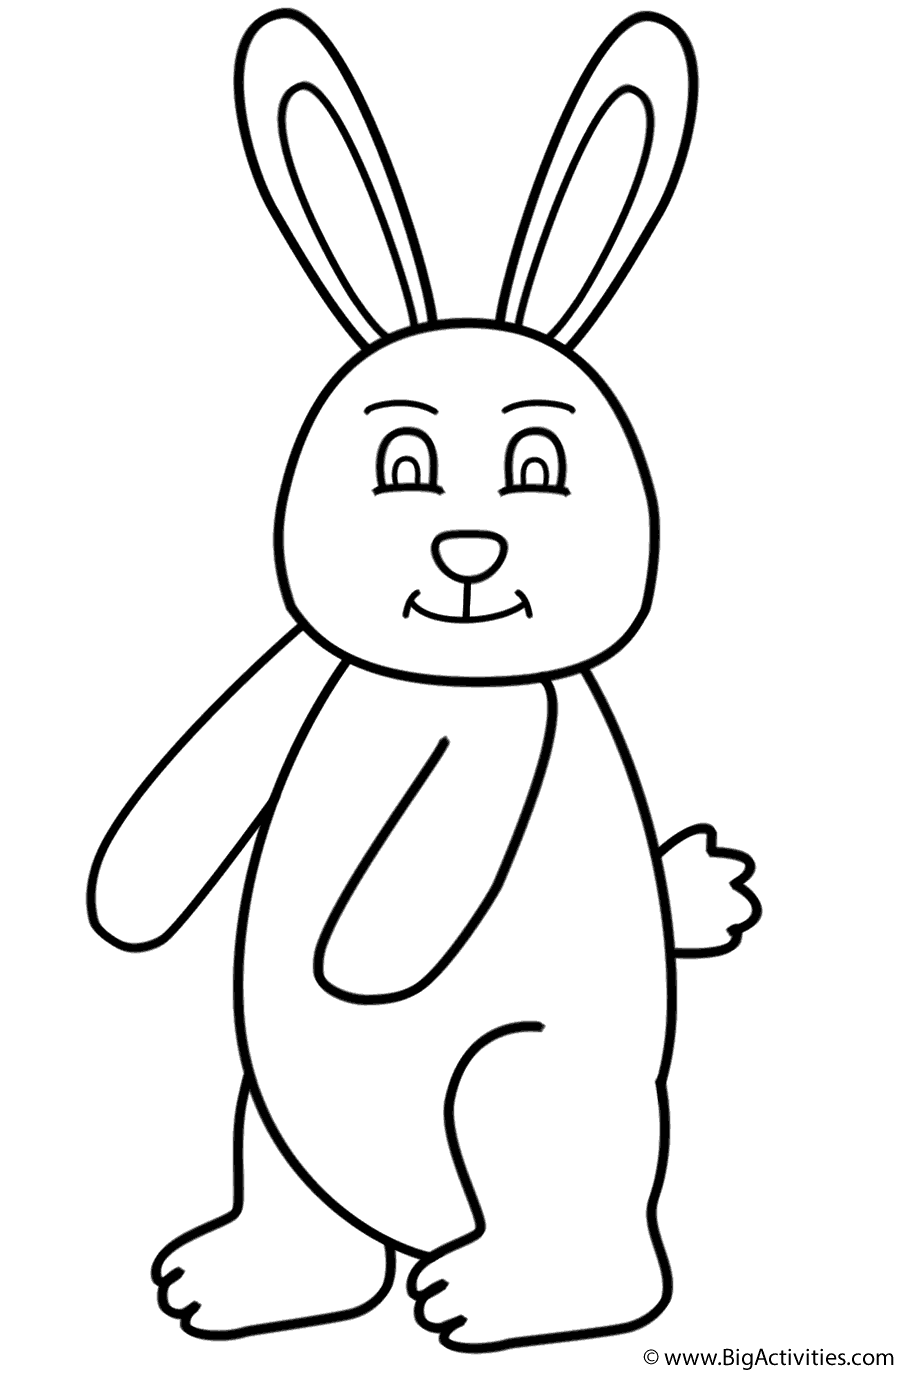 Easter Bunny Standing - Coloring Page (Easter)